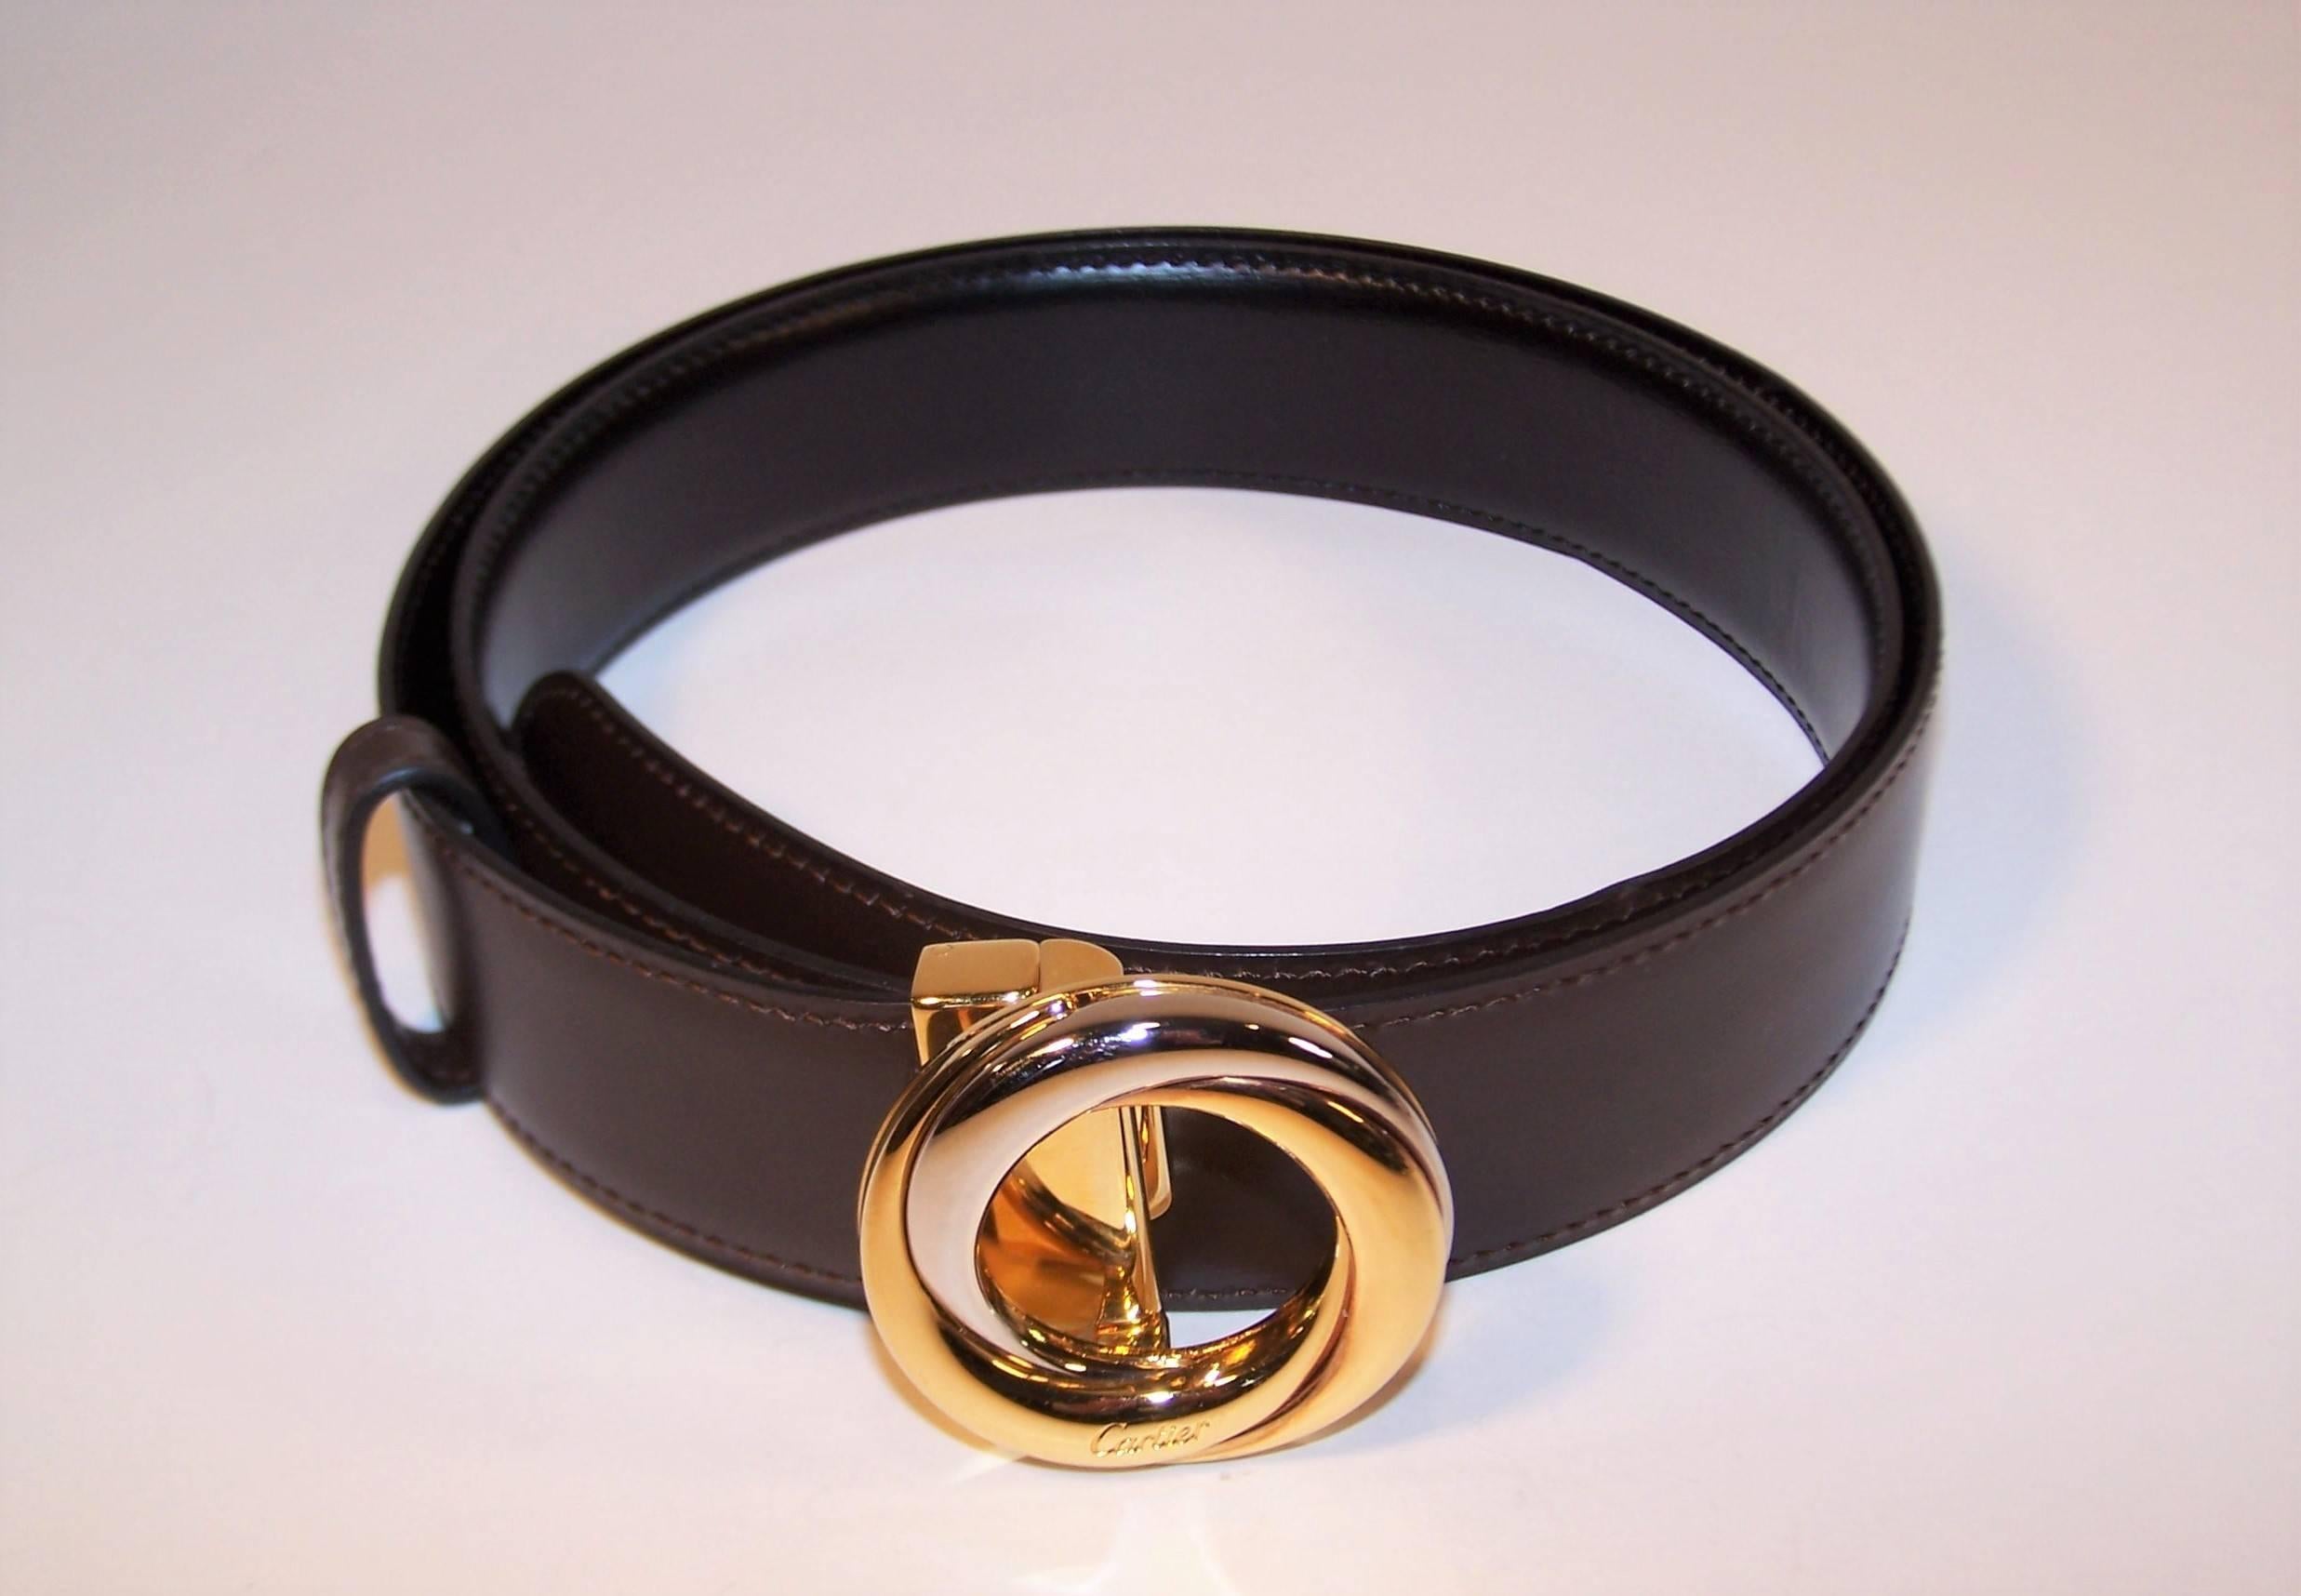 This classic 'Trinity' belt from Cartier is a wonderful wardrobe essential.  The 1.63" diameter silver and gold plated buckle is designed to clip off with a hinged lever allowing an easy conversion to the reversible leather belt from a dark